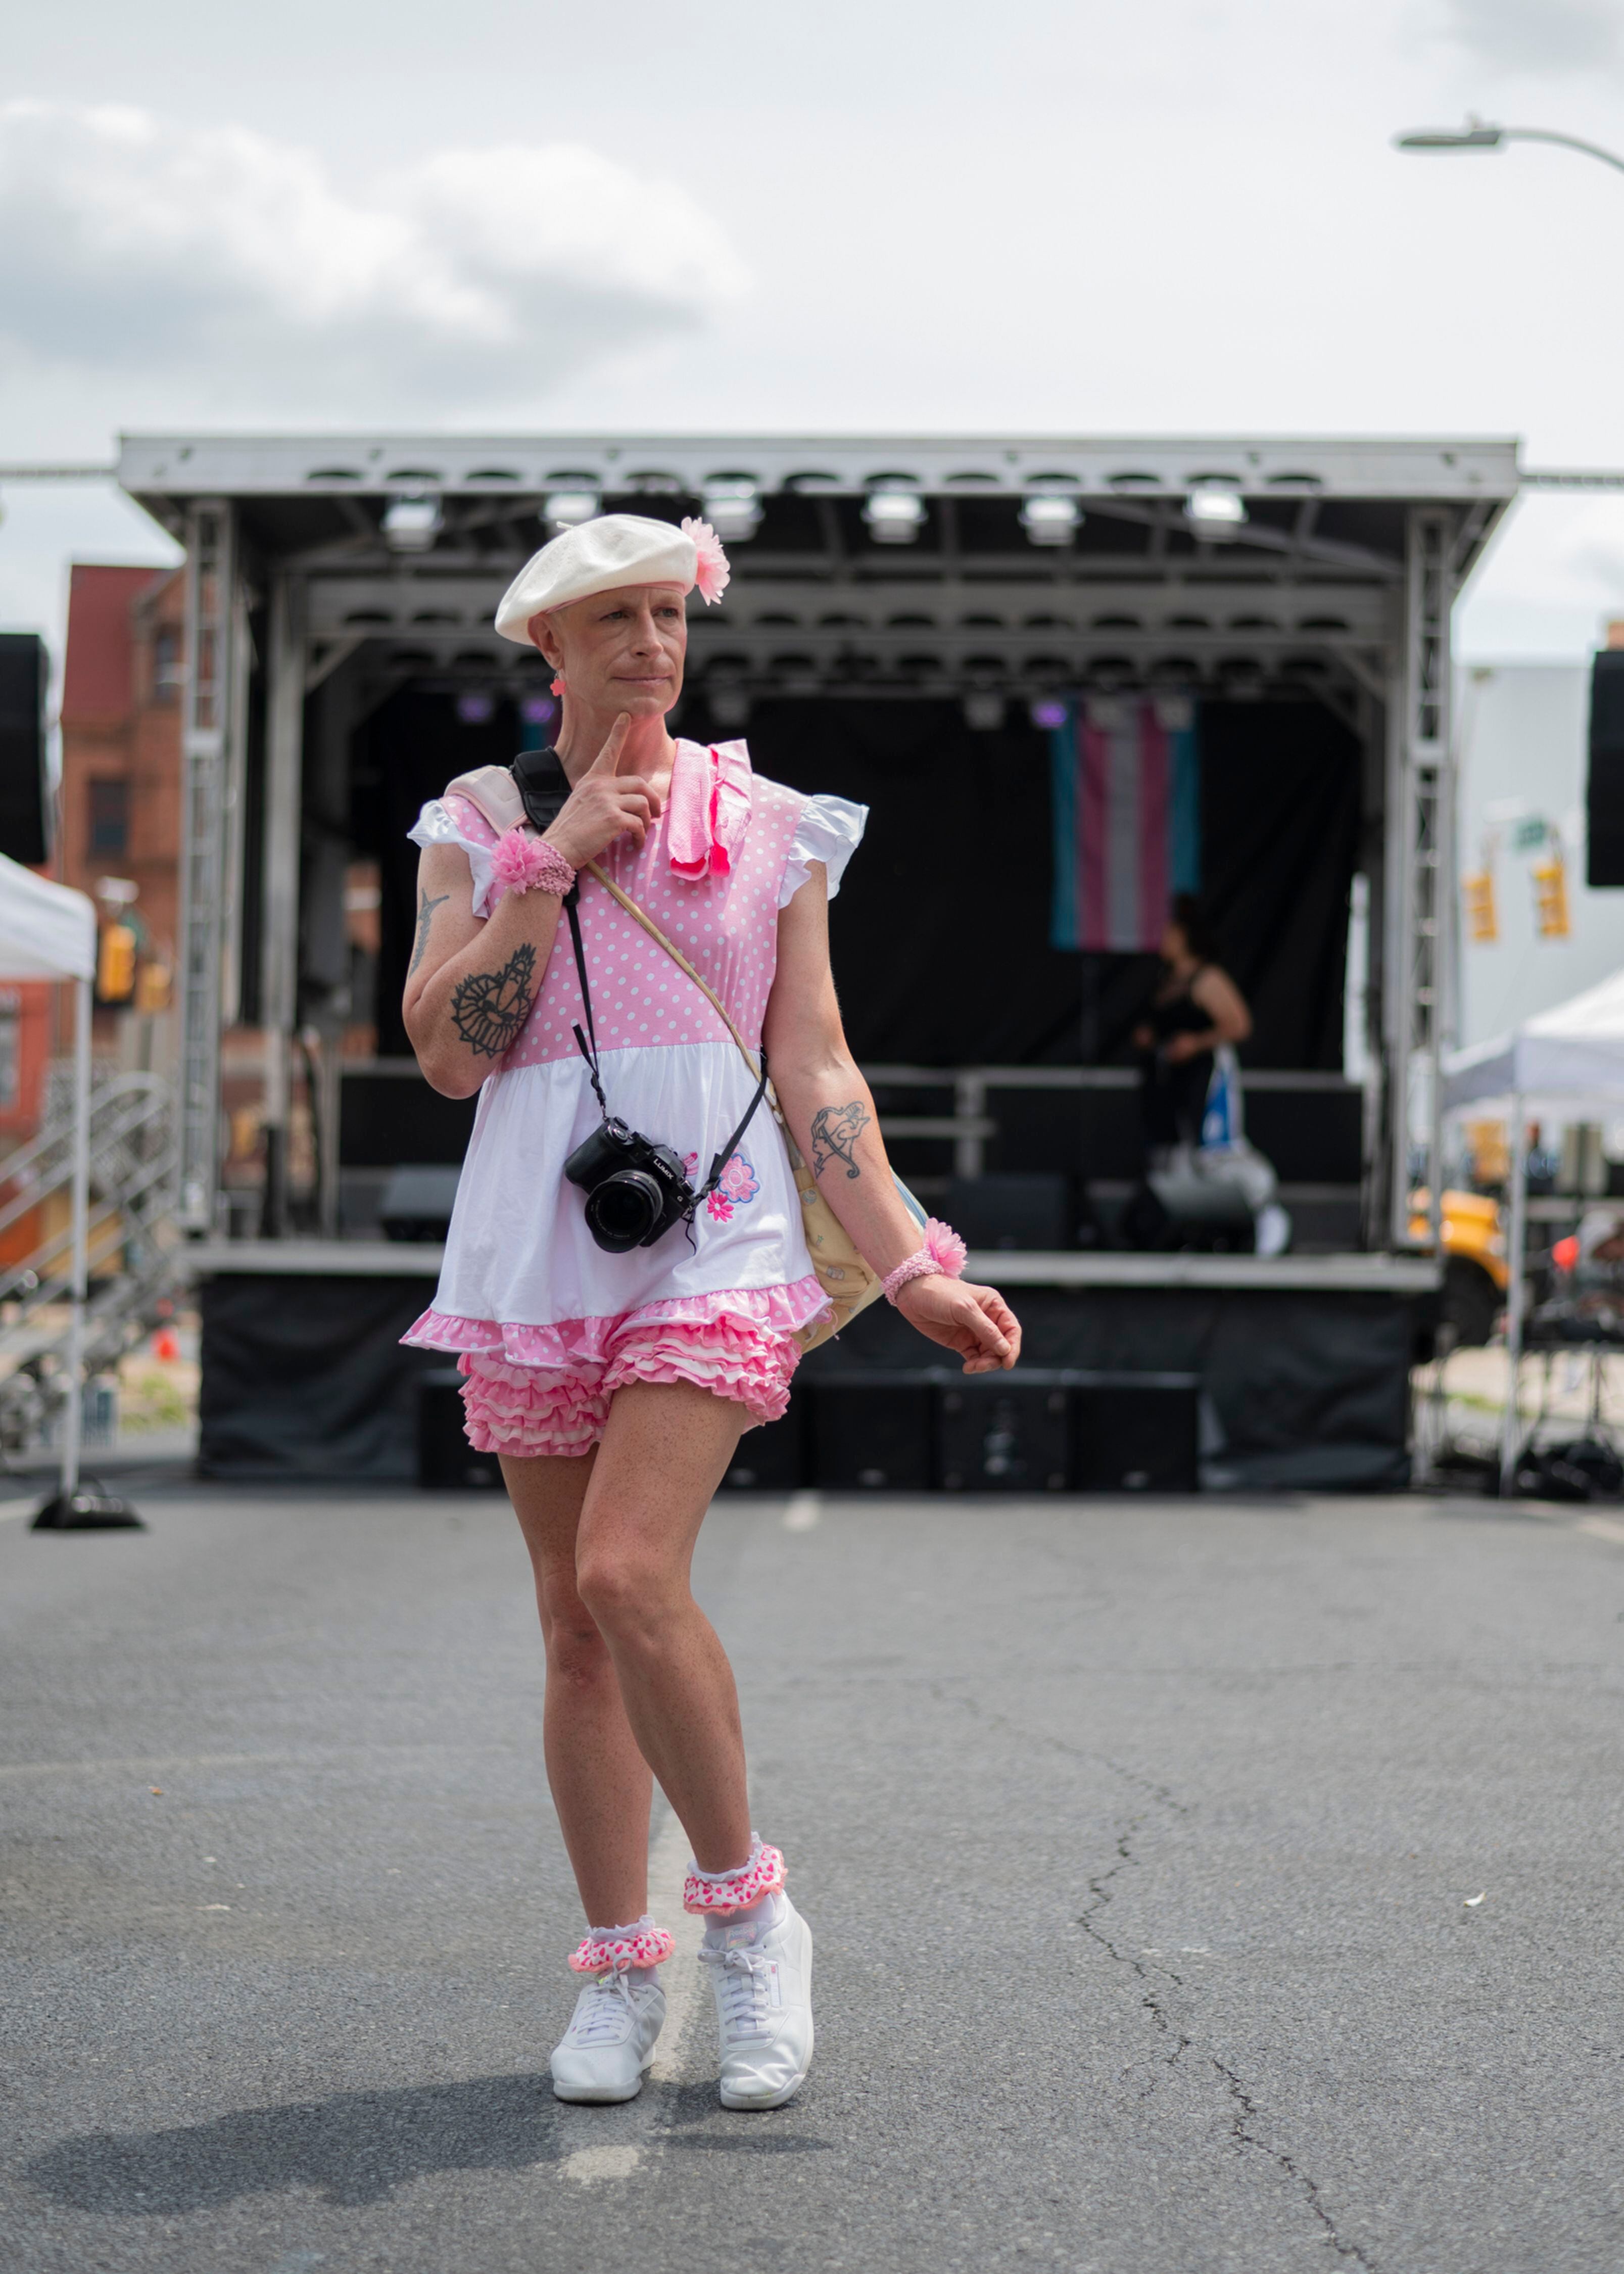 Photos: Baltimore Trans Pride festivities draw thousands - The Baltimore  Banner